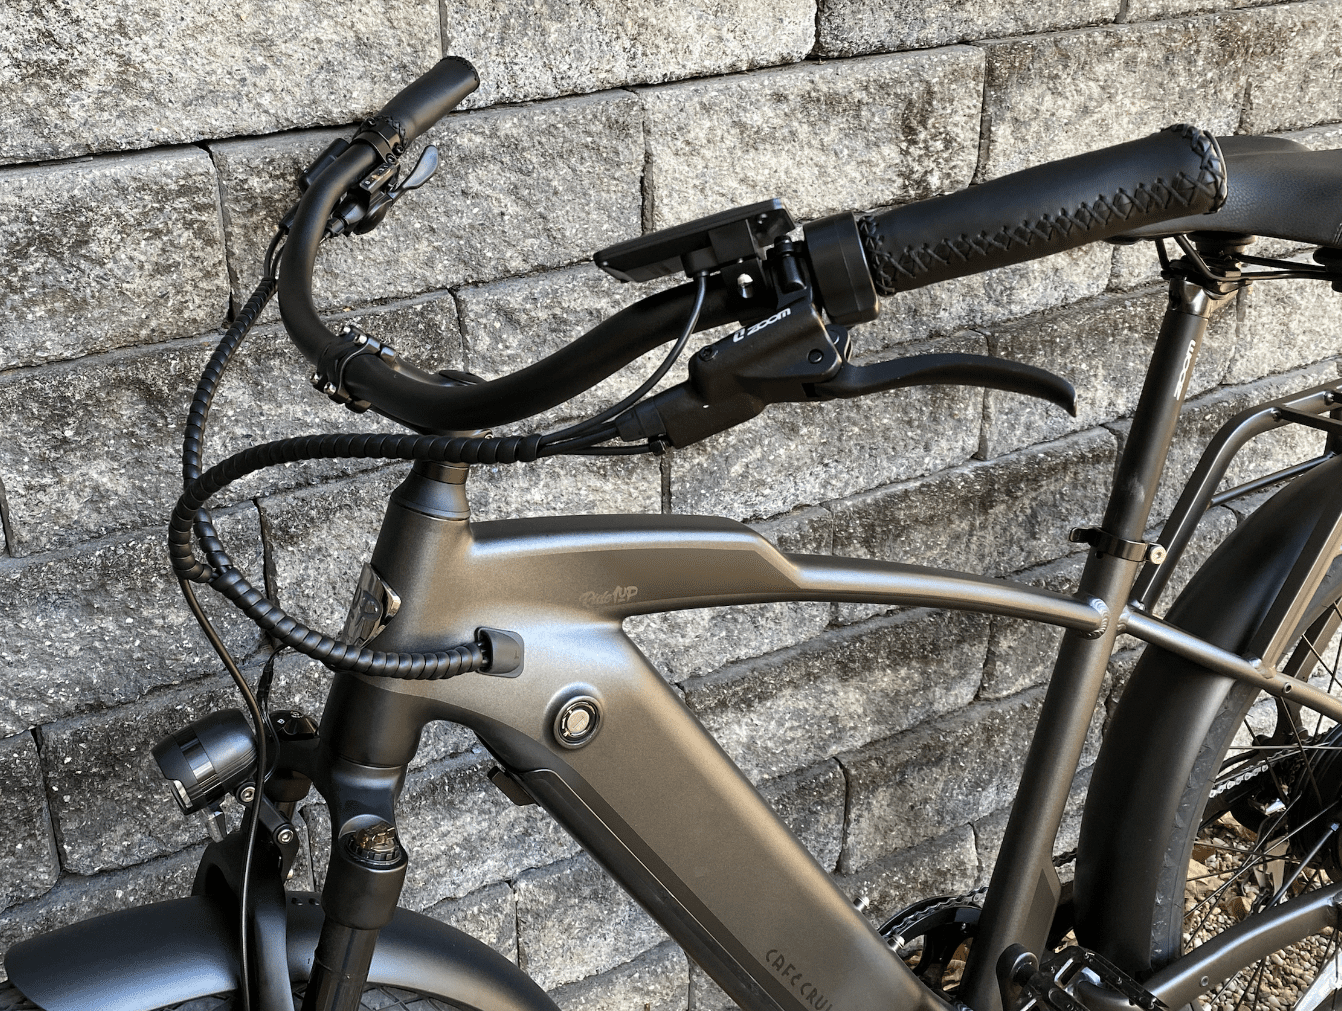 The grips filled with faux leather grips and front suspension are an odd combination. 